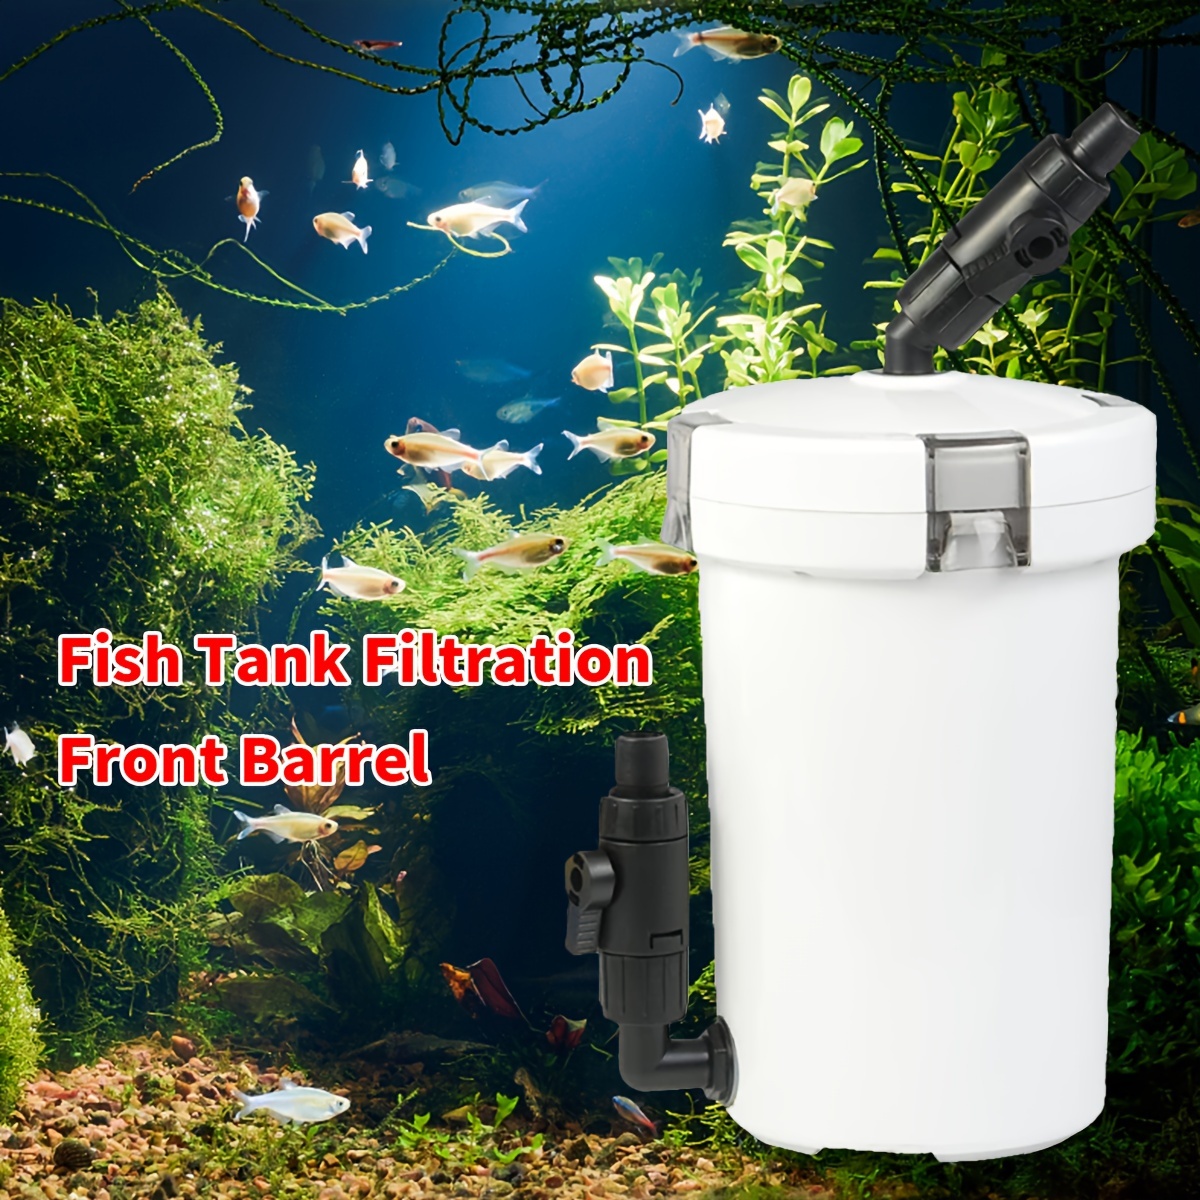 

Silent Aquarium Pre-filter Bucket - Non-powered, External Filtration System For Freshwater & Saltwater Tanks, Ideal For Fish And Seaweed Aquarium Filter System Filter For Fish Aquarium